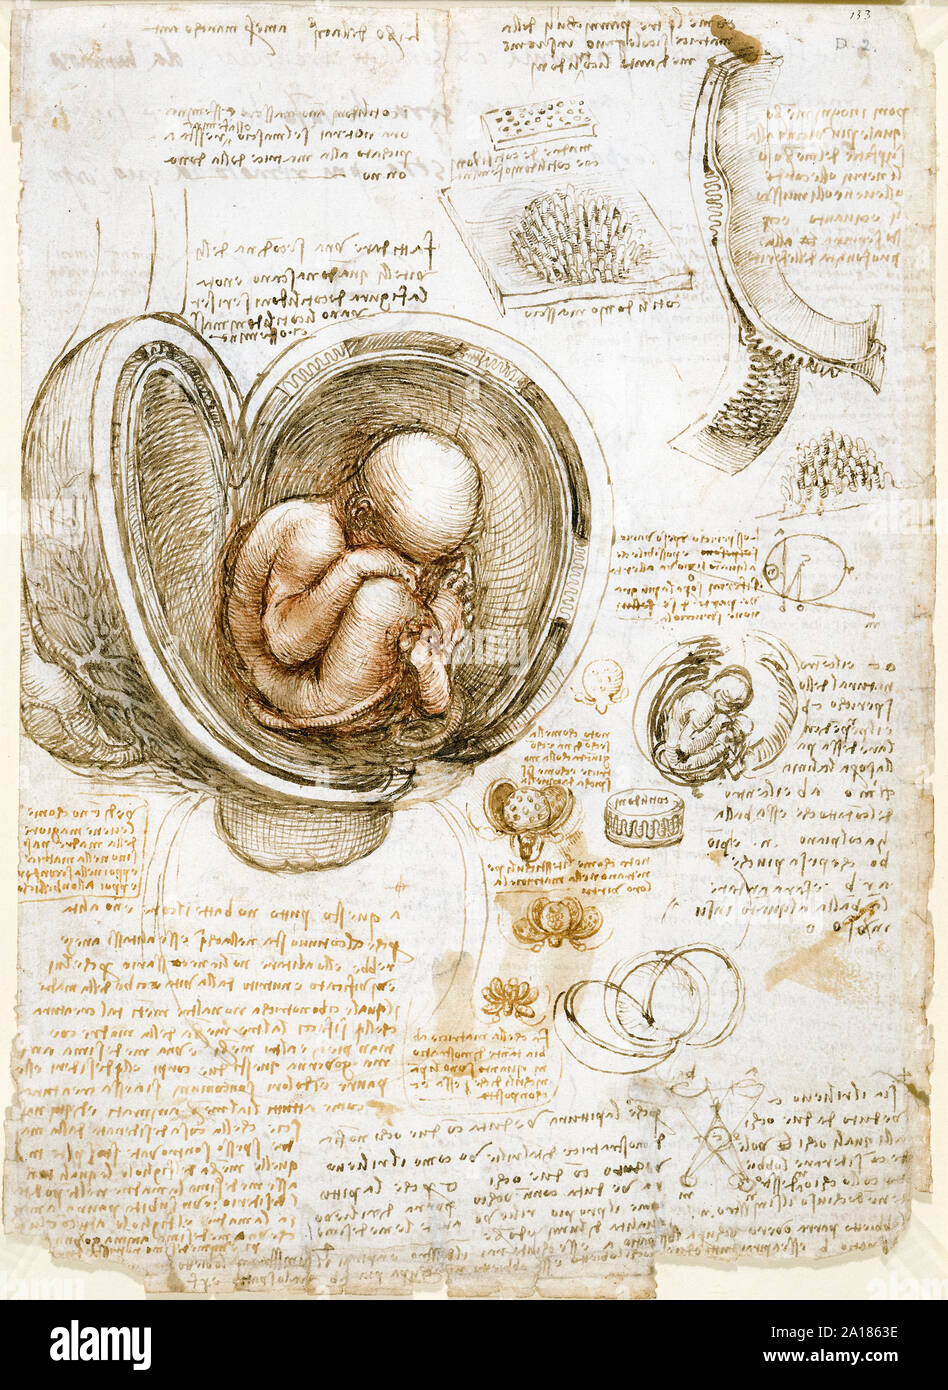 Studies of the Fetus in the Womb by Leonardo da Vinci (1452-1519) circa 1511 showing the human fetus in a breech position inside a dissected uterus. Stock Photo